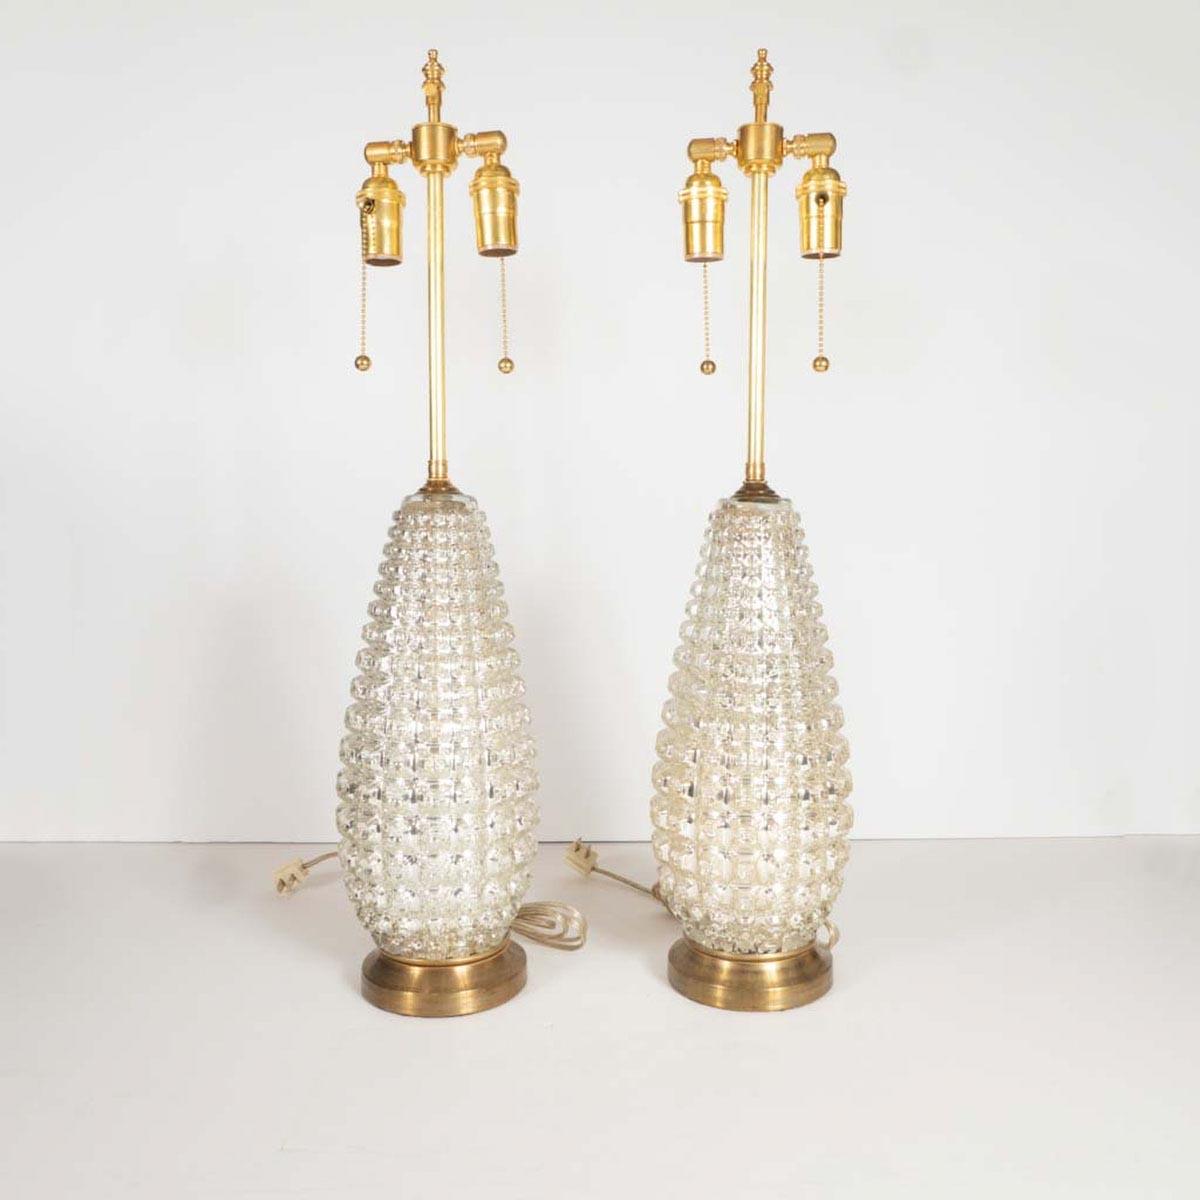 Pair of faceted mercury glass table lamps with brass hardware.